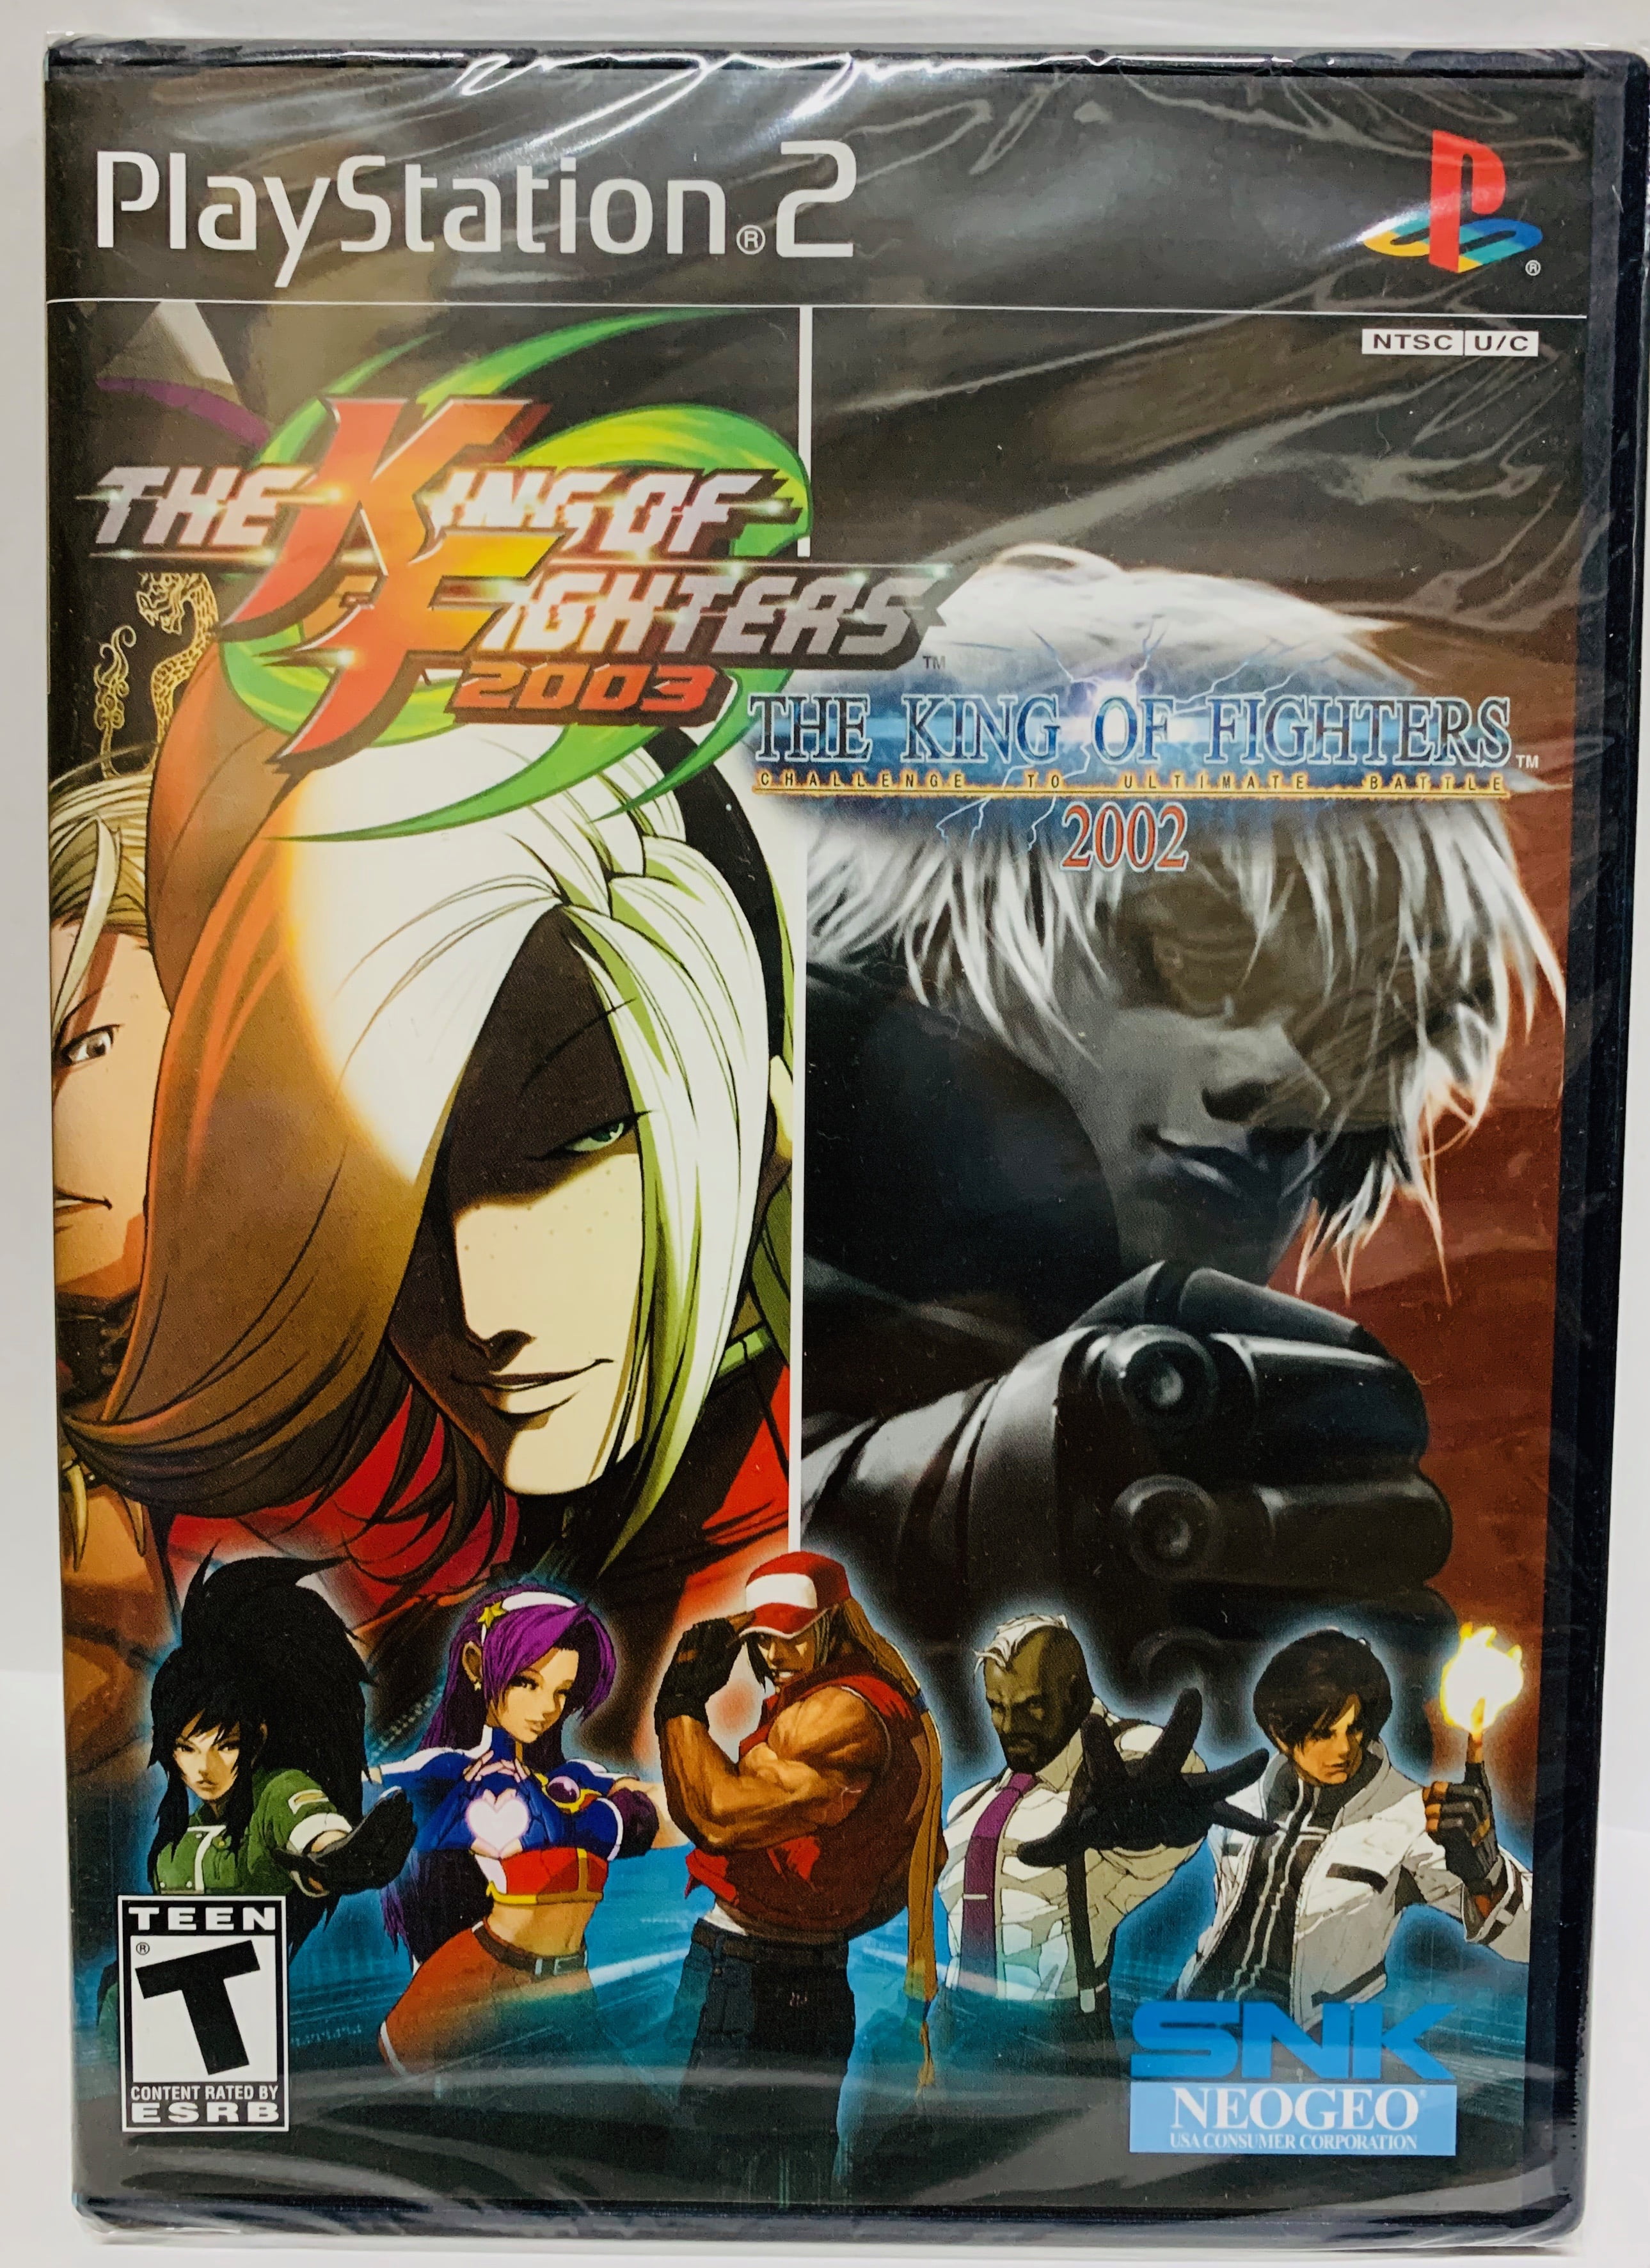  King of Fighters 2000 & 2001 - PlayStation 2 : Artist